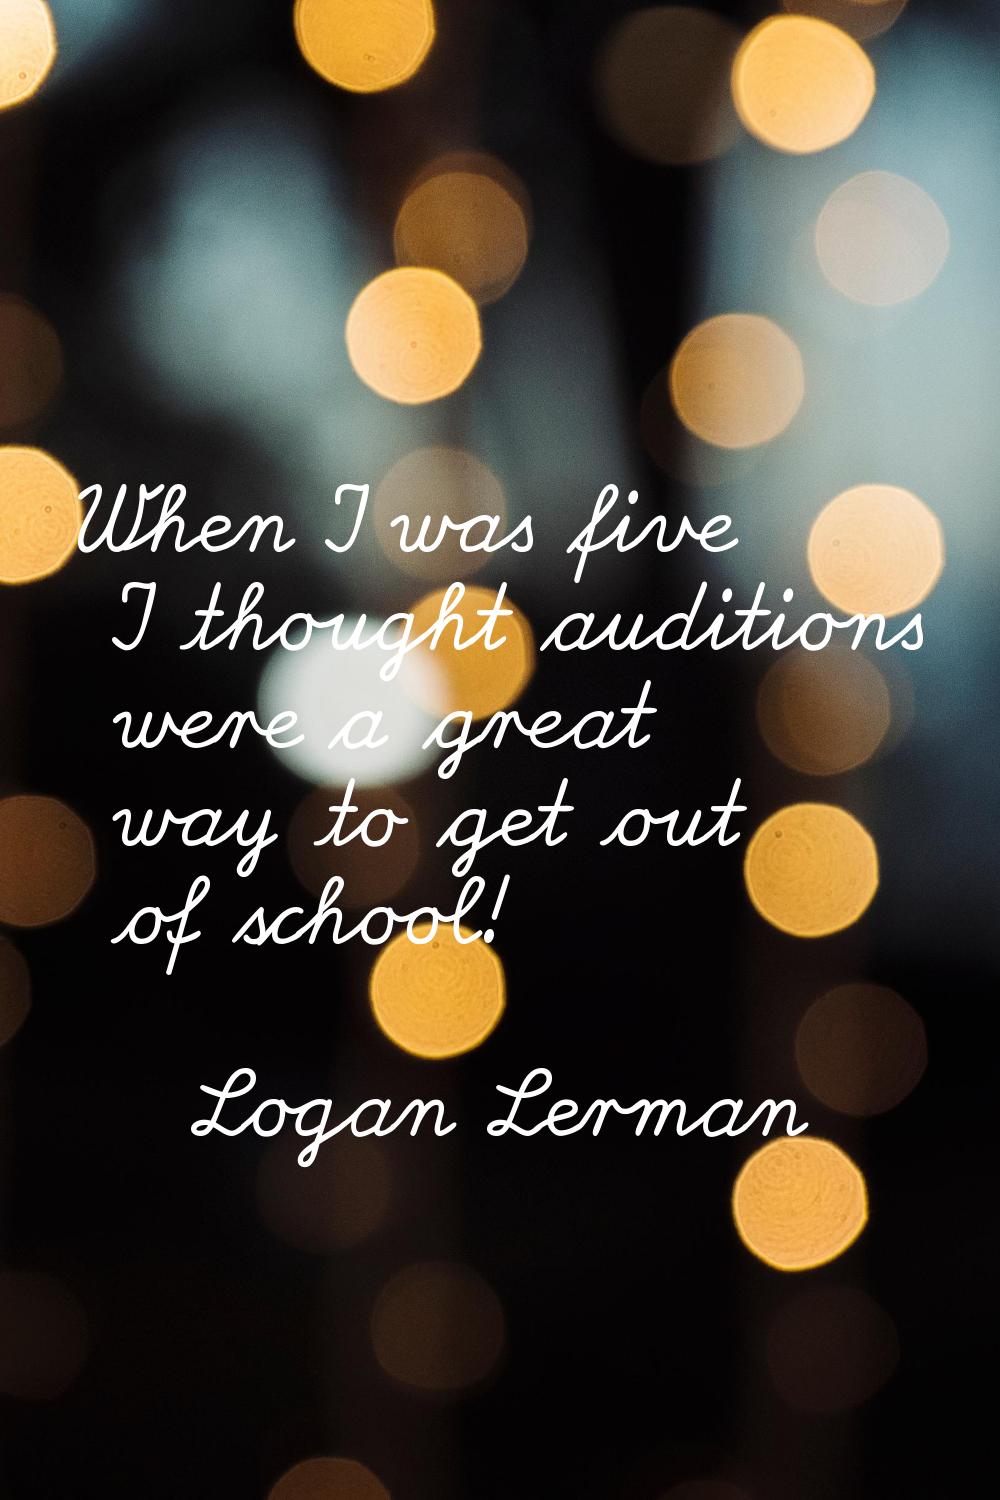 When I was five I thought auditions were a great way to get out of school!